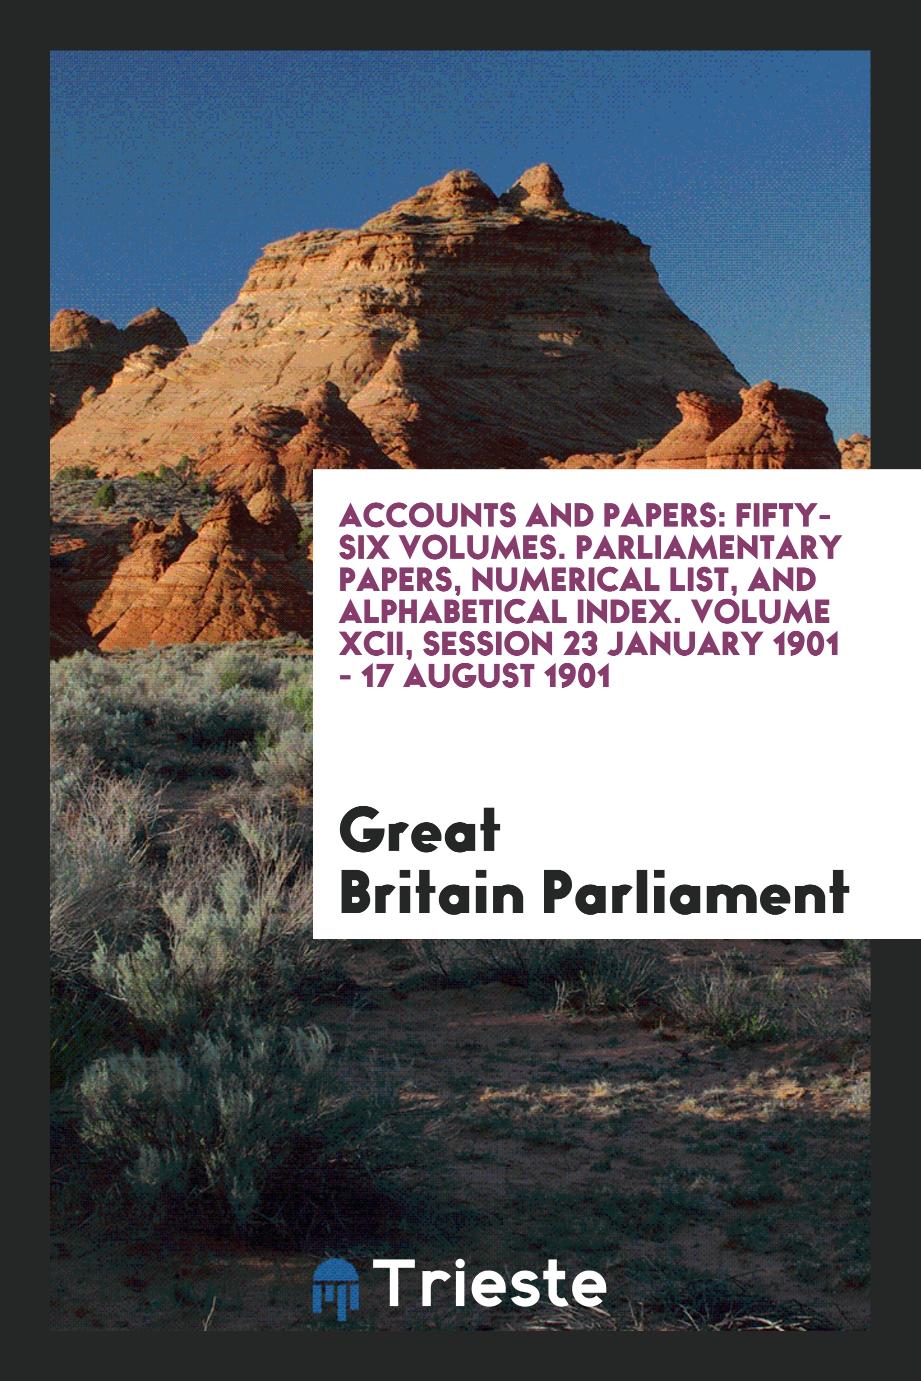 Accounts and Papers: Fifty-Six Volumes. Parliamentary Papers, Numerical List, and Alphabetical Index. Volume XCII, Session 23 January 1901 - 17 August 1901